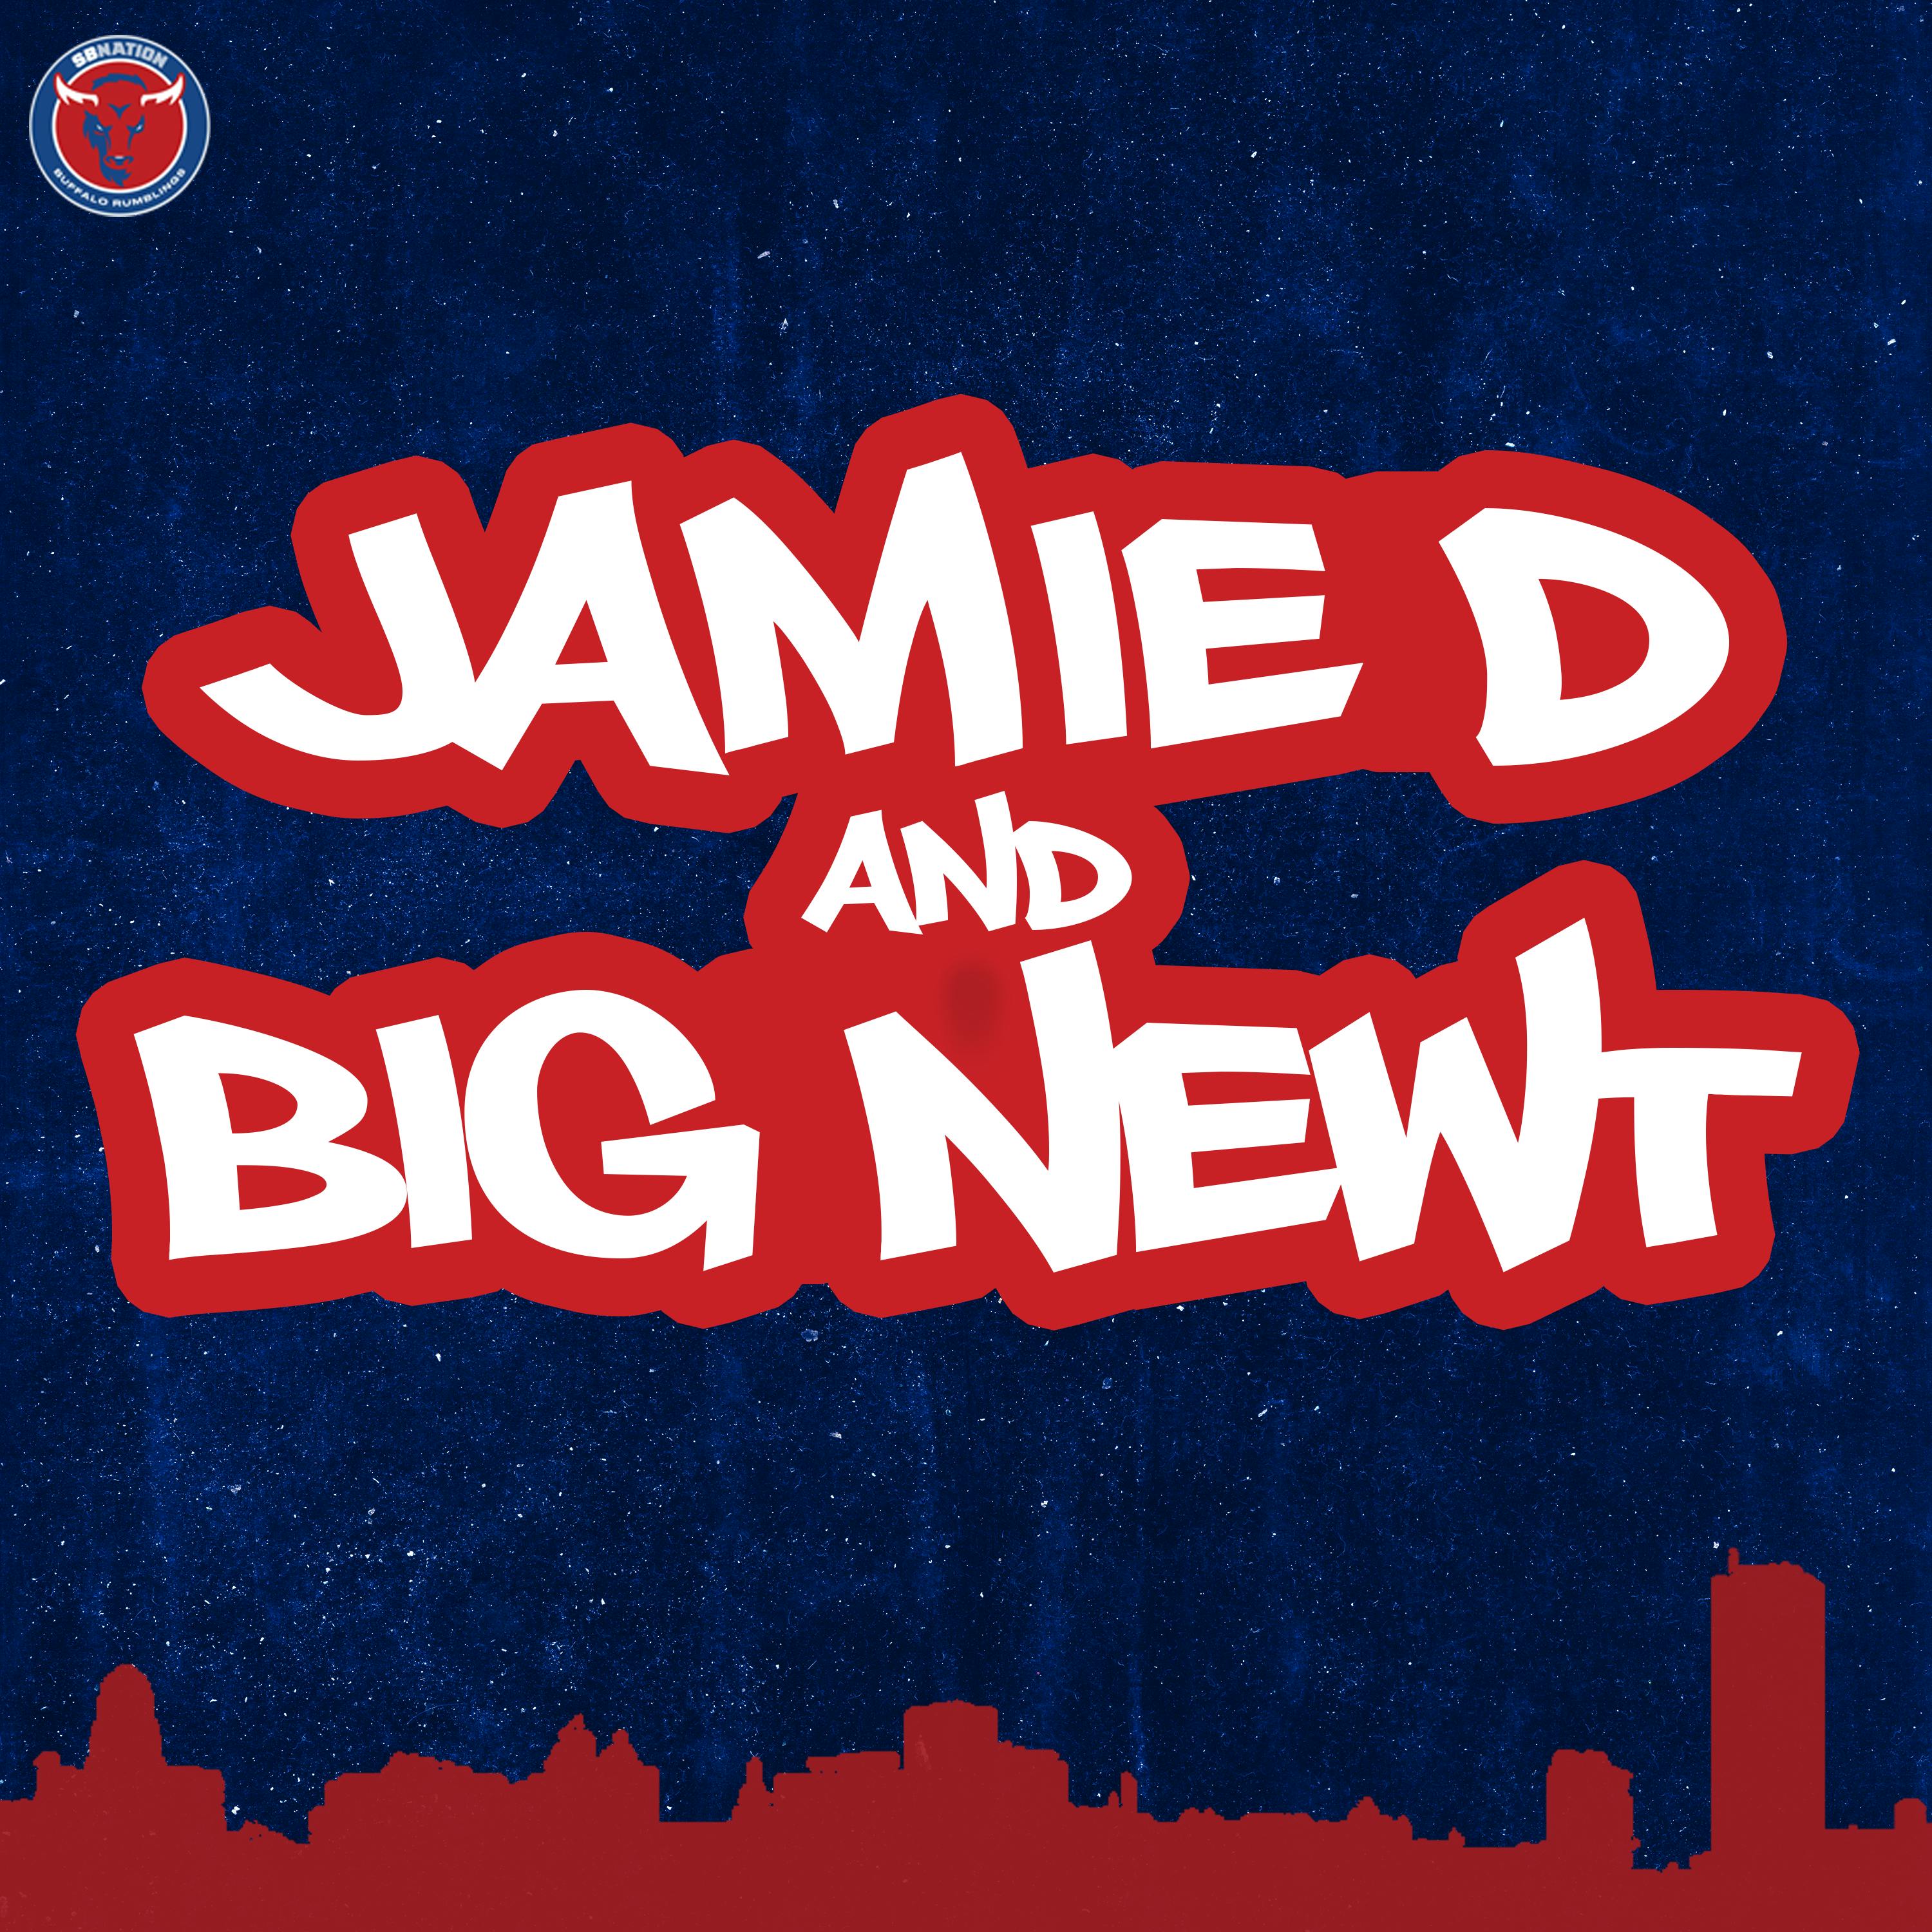 Jamie D & Big Newt: Bills and football thoughts